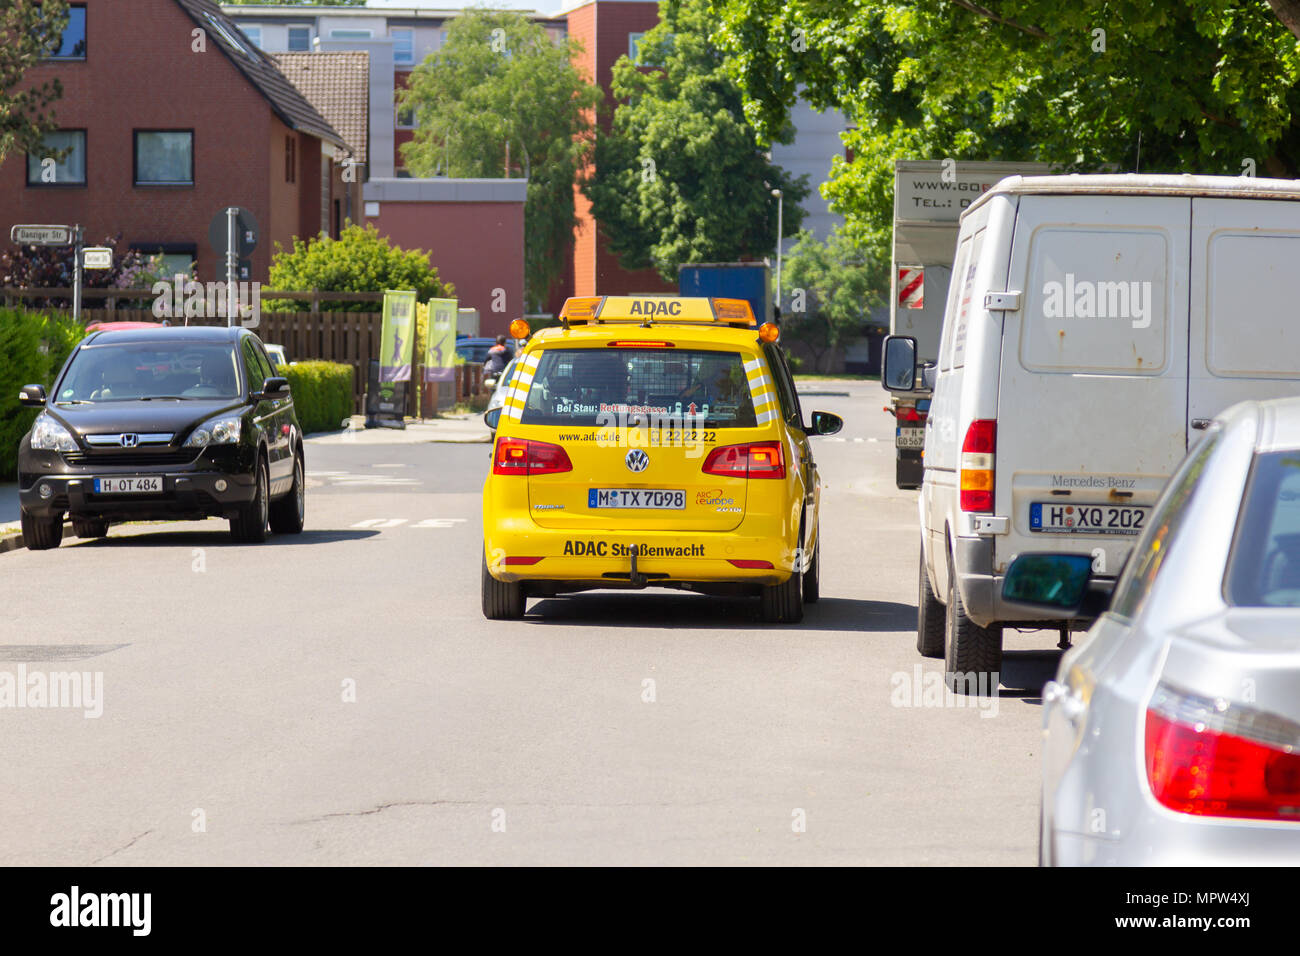 HANNOVER / GERMANY - MAY 21, 2018: Breakdown service car from ADAC, german automobile club drives on a street Stock Photo